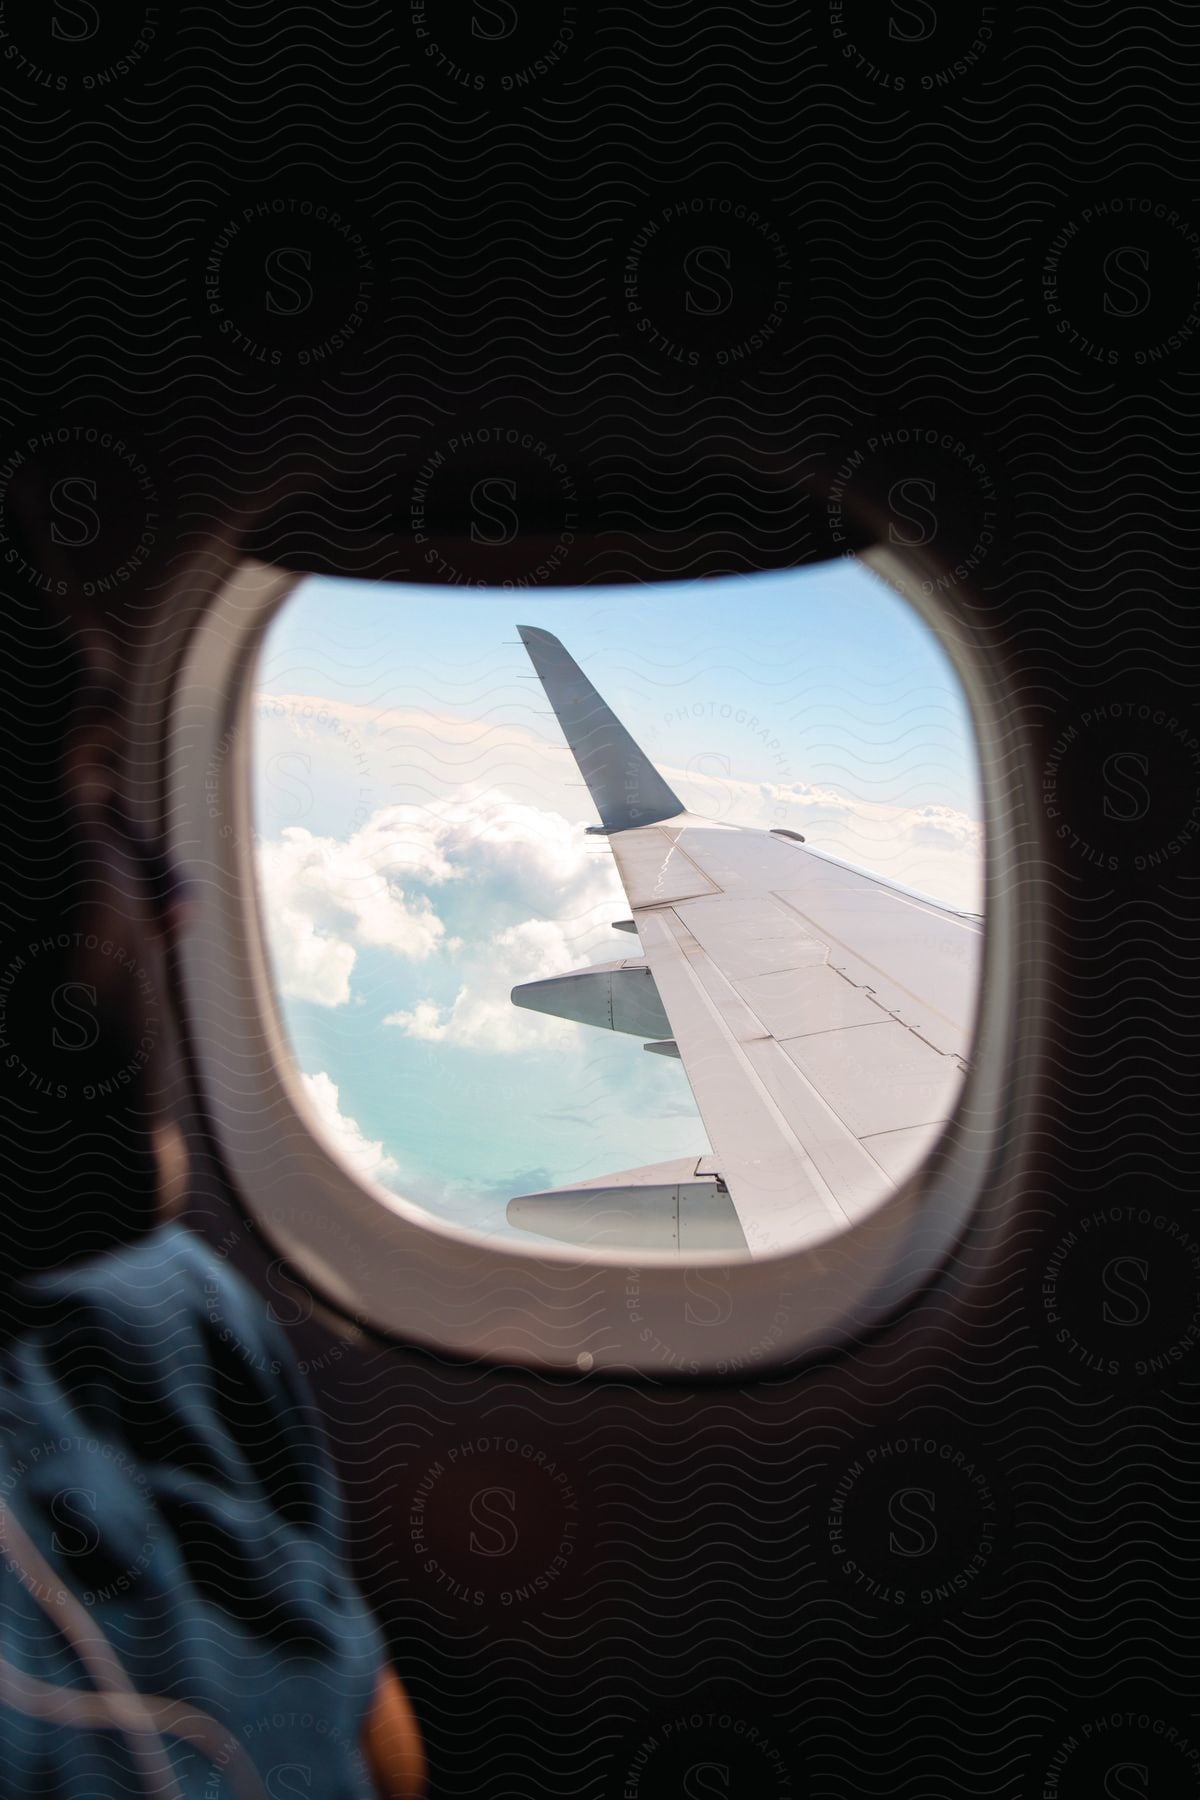 A man looks out of an airplane window at the wing and sky